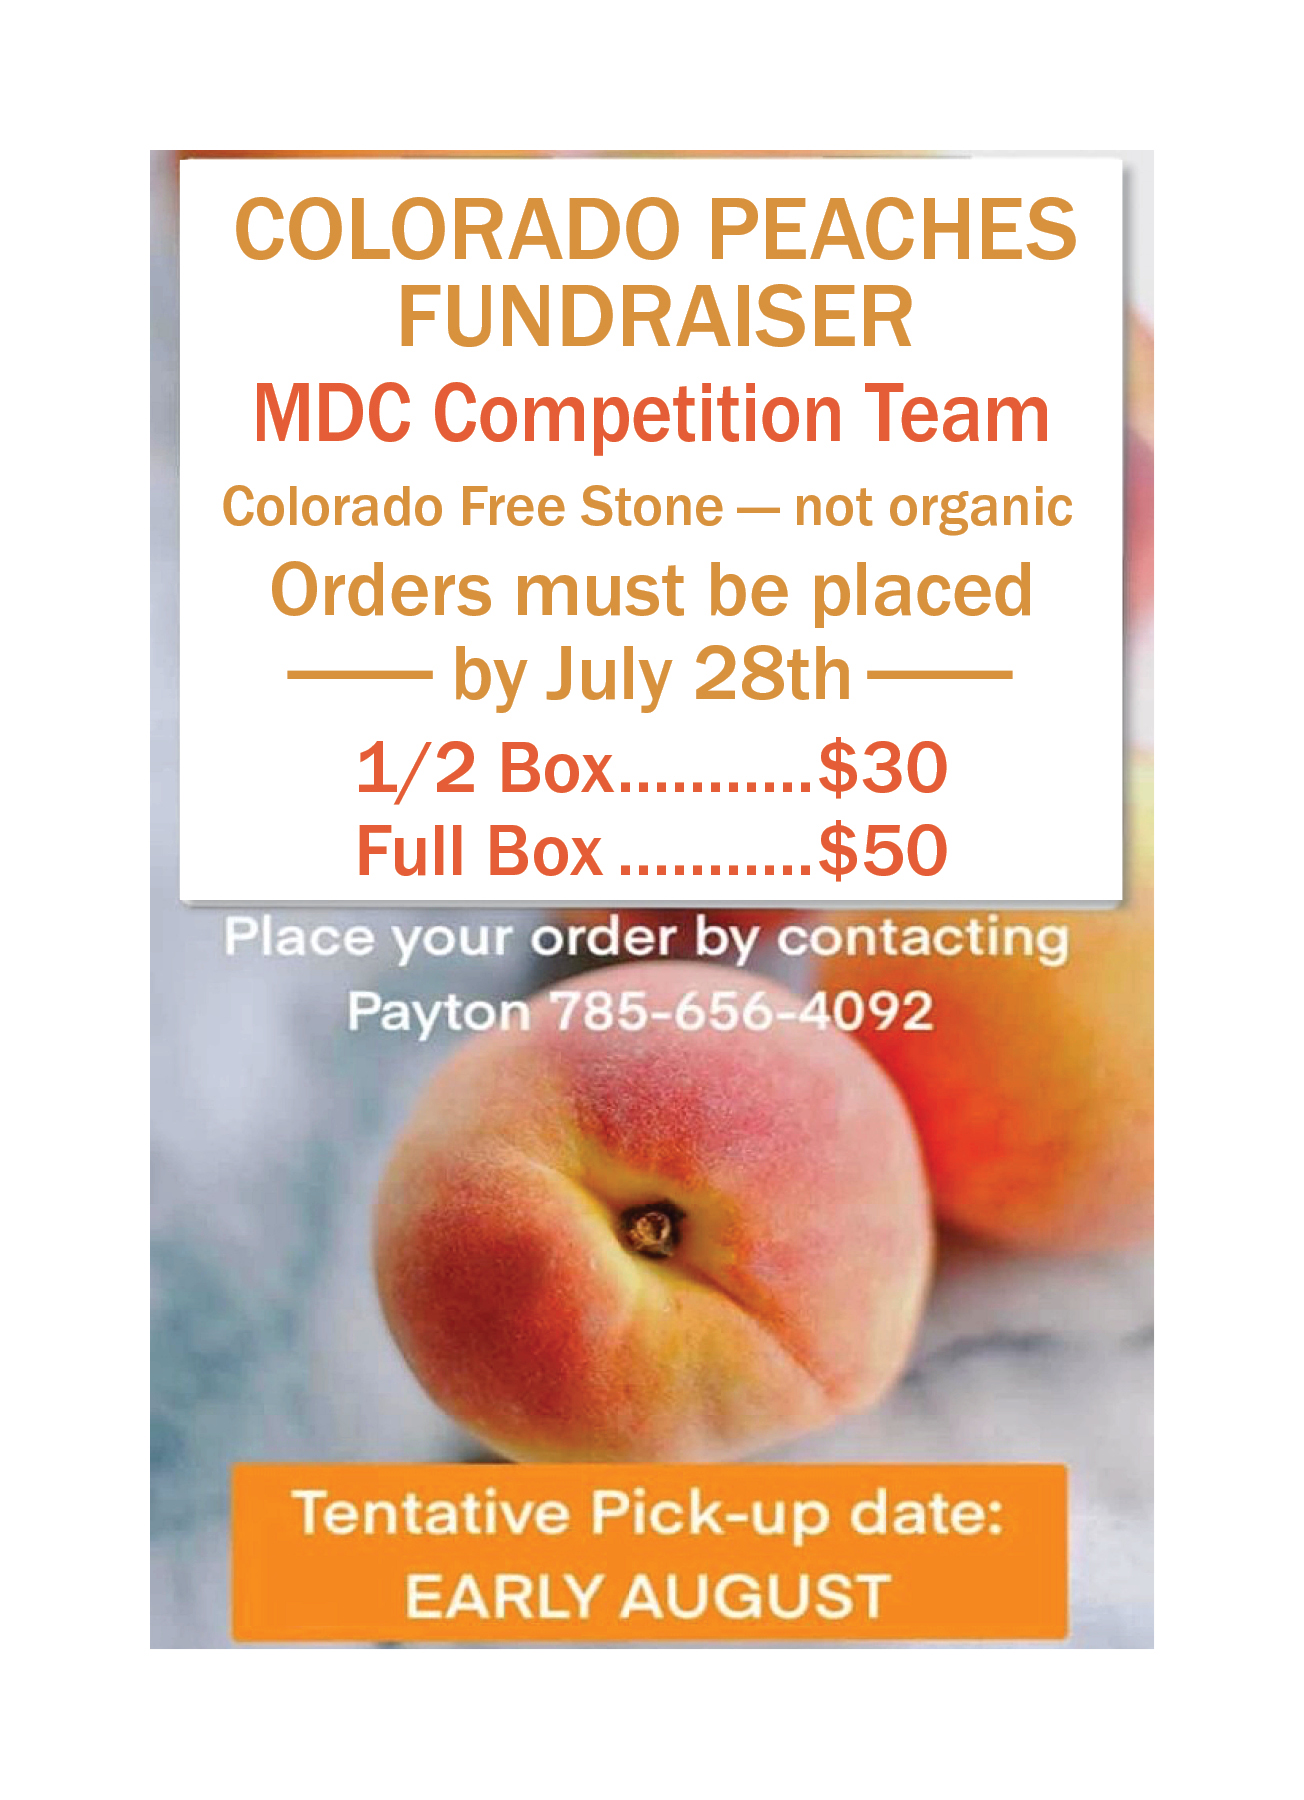 Motion Dance Company is selling Colorado peaches!